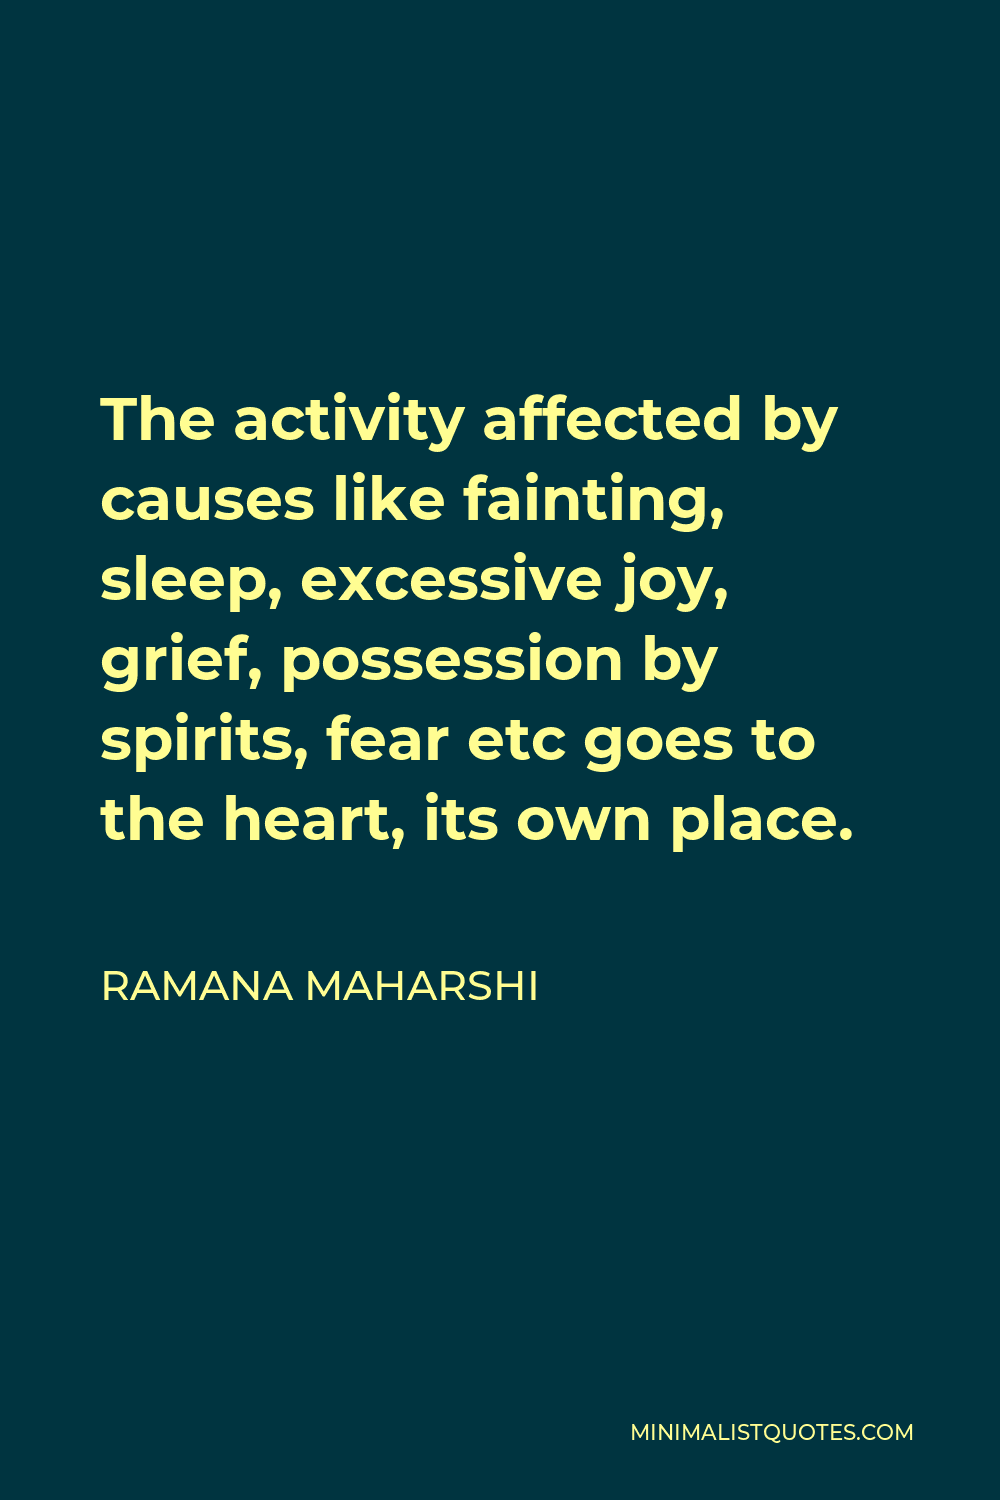 Ramana Maharshi Quote - The activity affected by causes like fainting, sleep, excessive joy, grief, possession by spirits, fear etc goes to the heart, its own place.